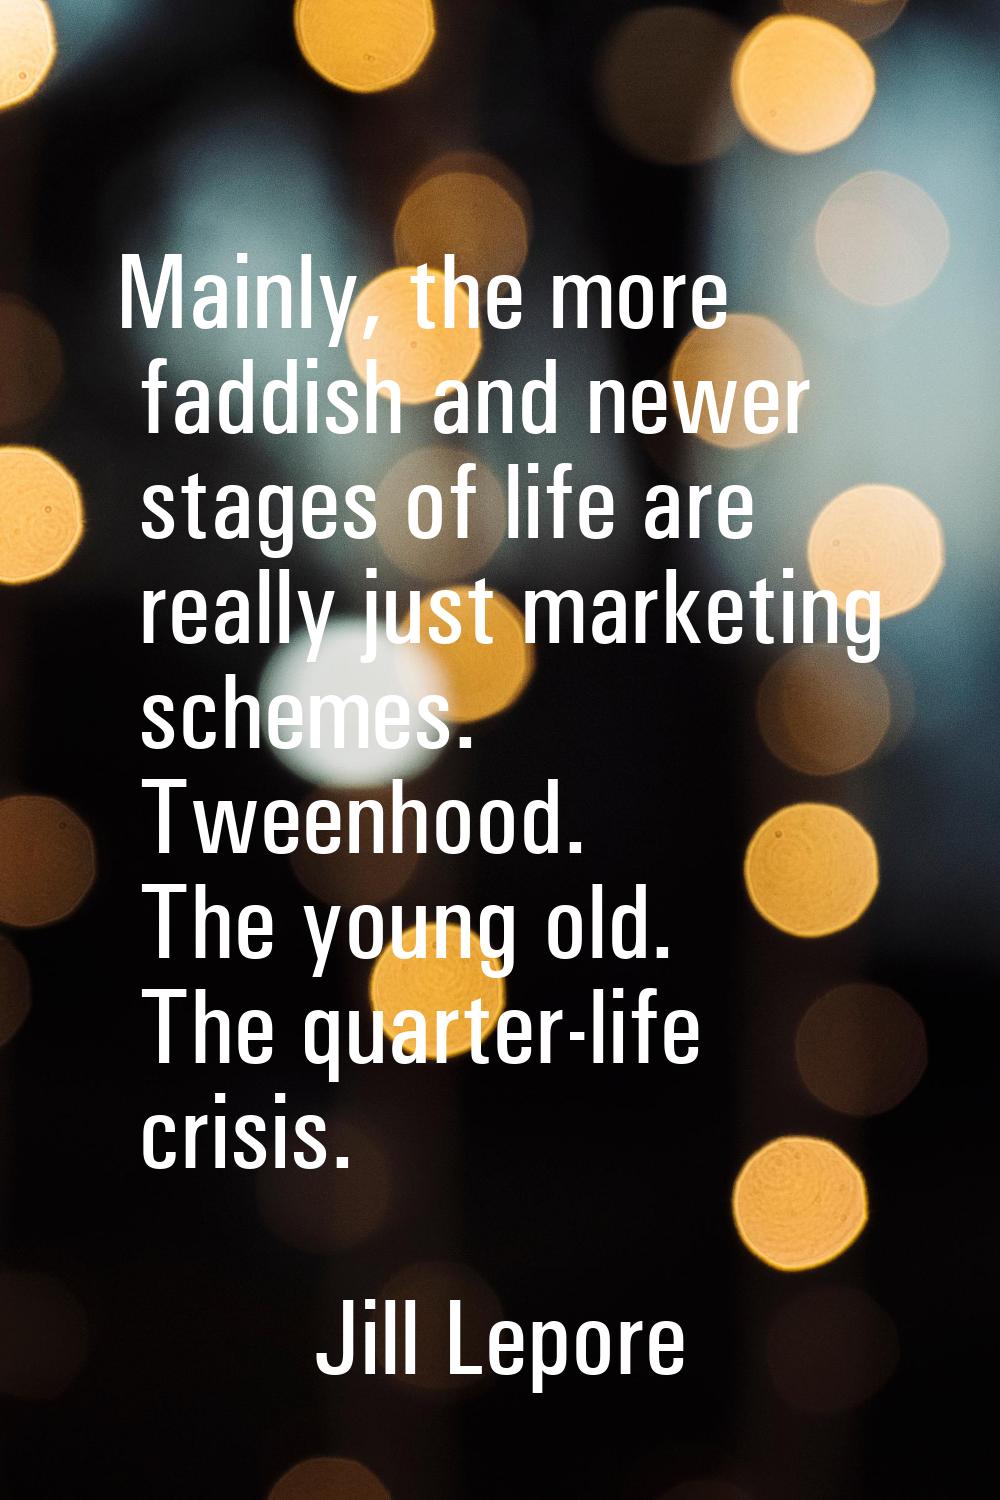 Mainly, the more faddish and newer stages of life are really just marketing schemes. Tweenhood. The